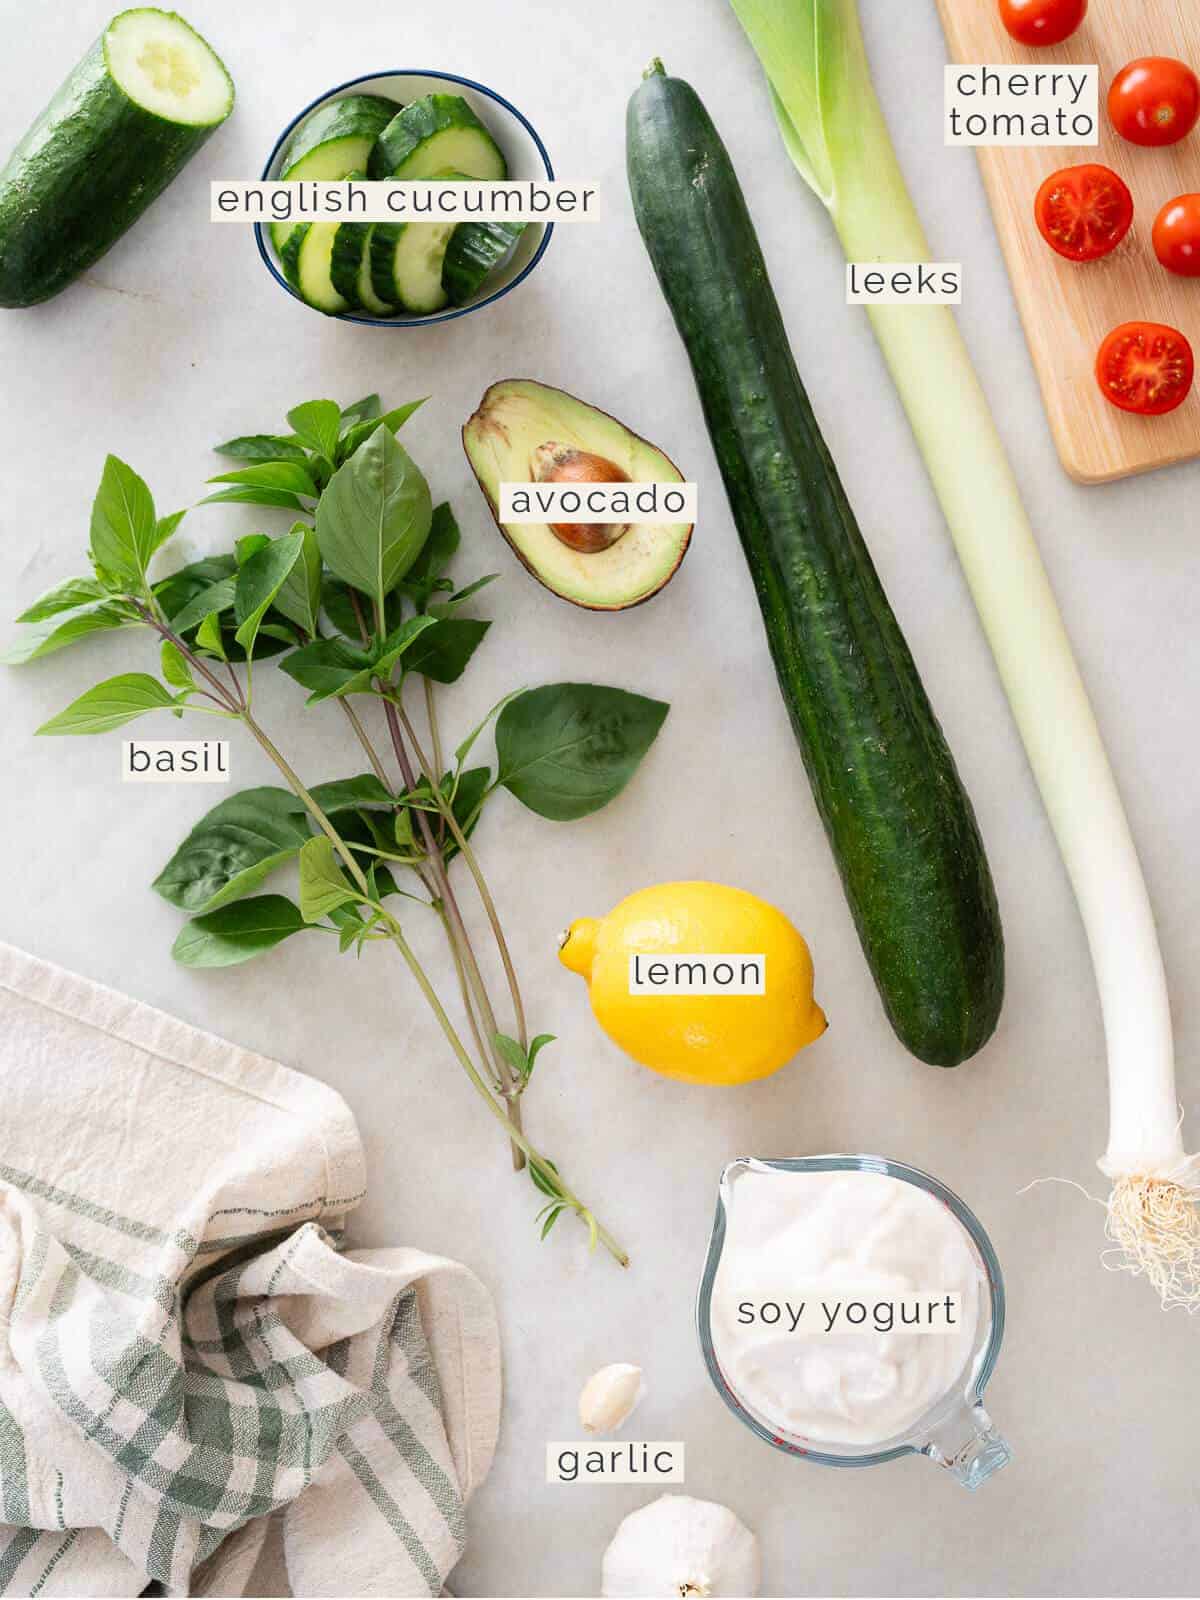 labeled ingredients to make cold cucumber soup.